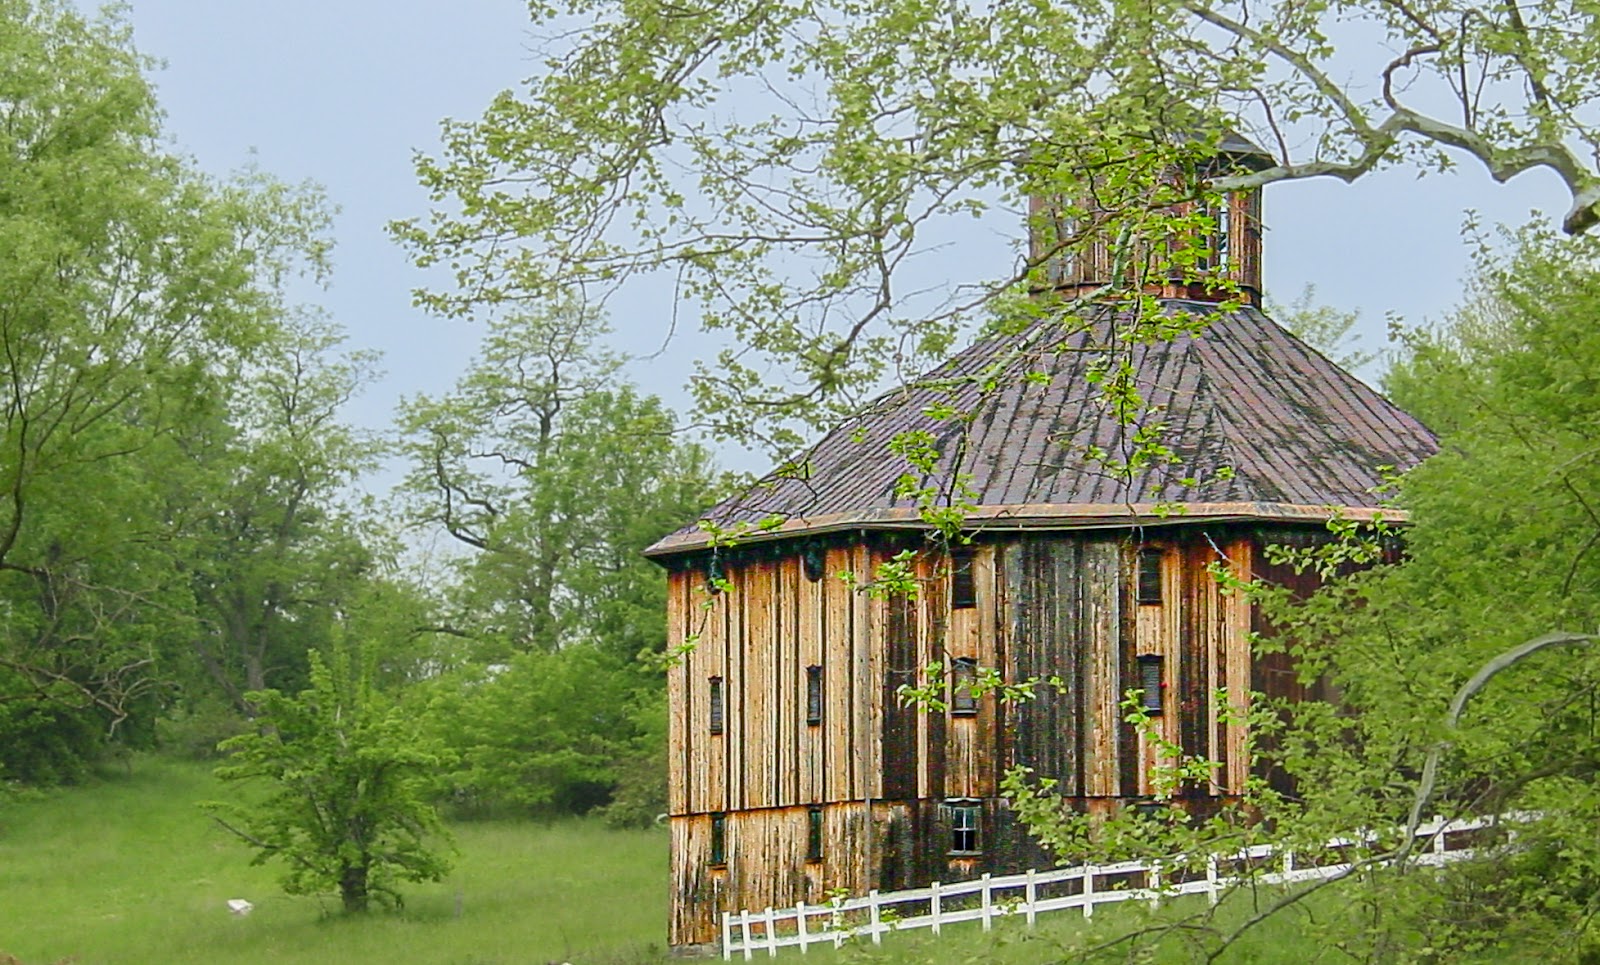 A weathered round wooden barn with small windows